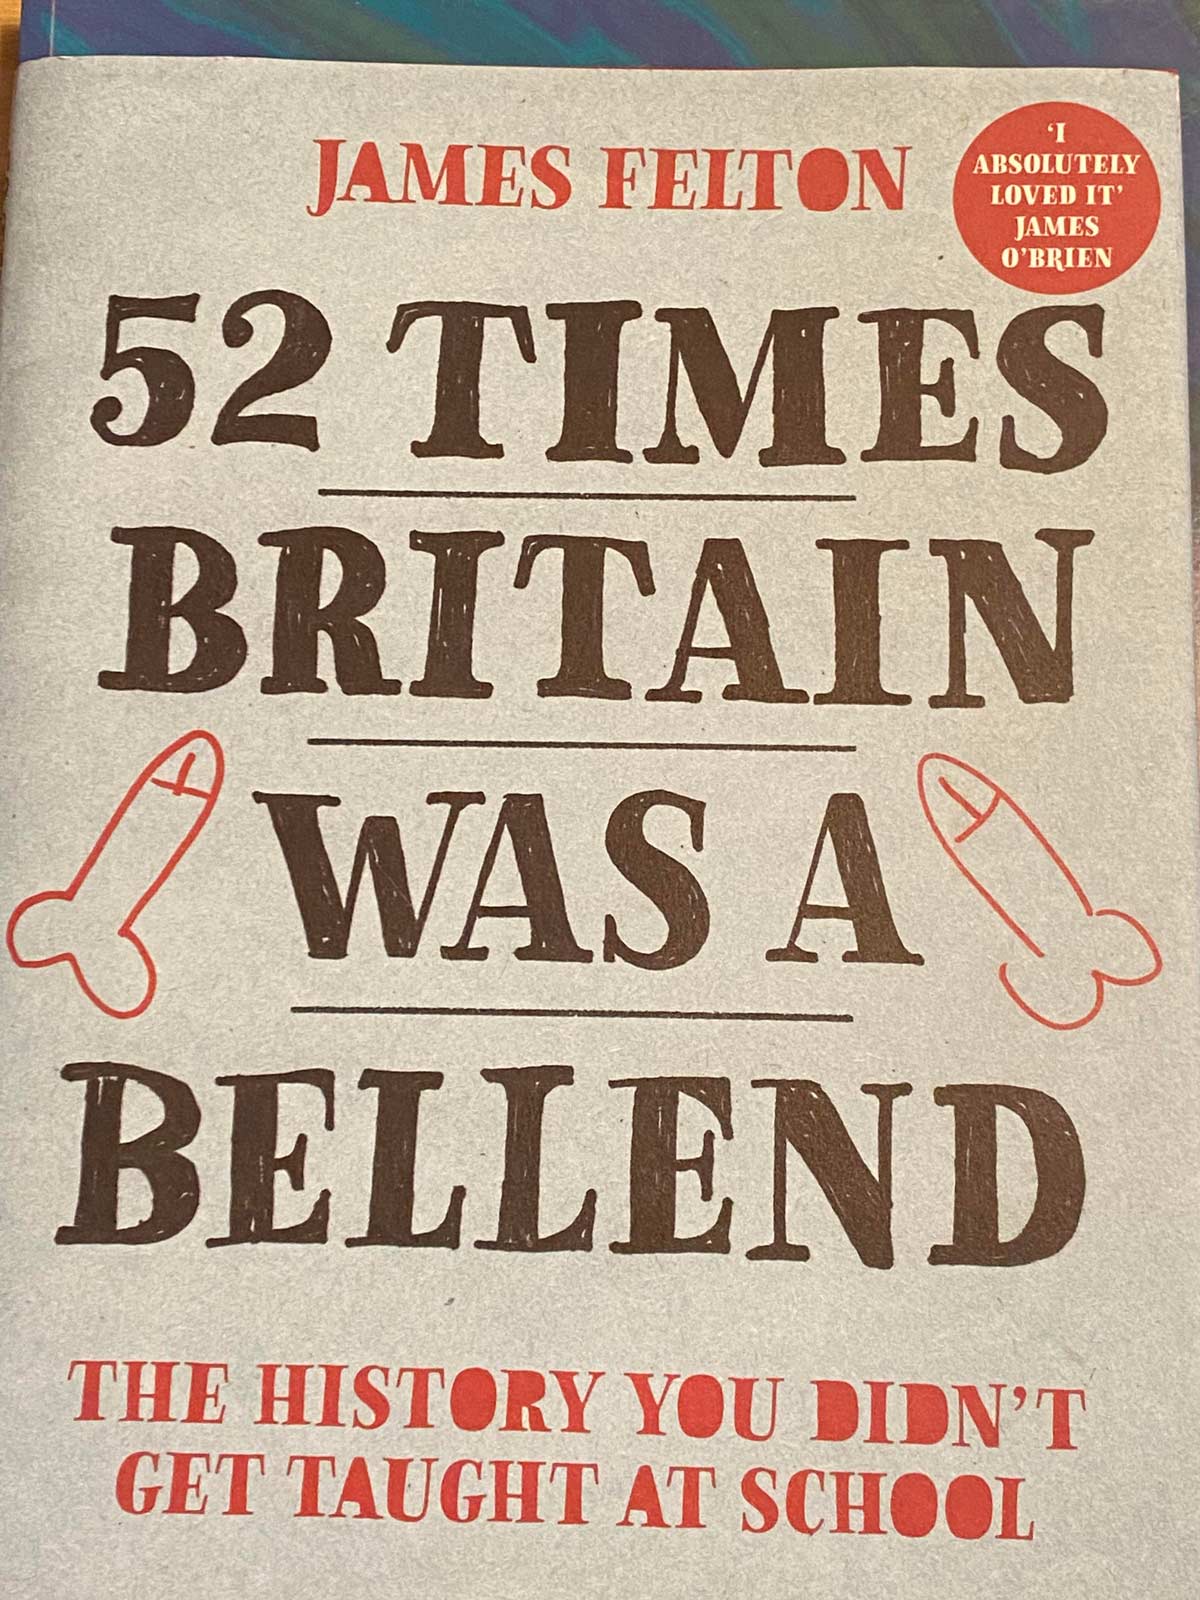 Had to share this “history” book a friend got me